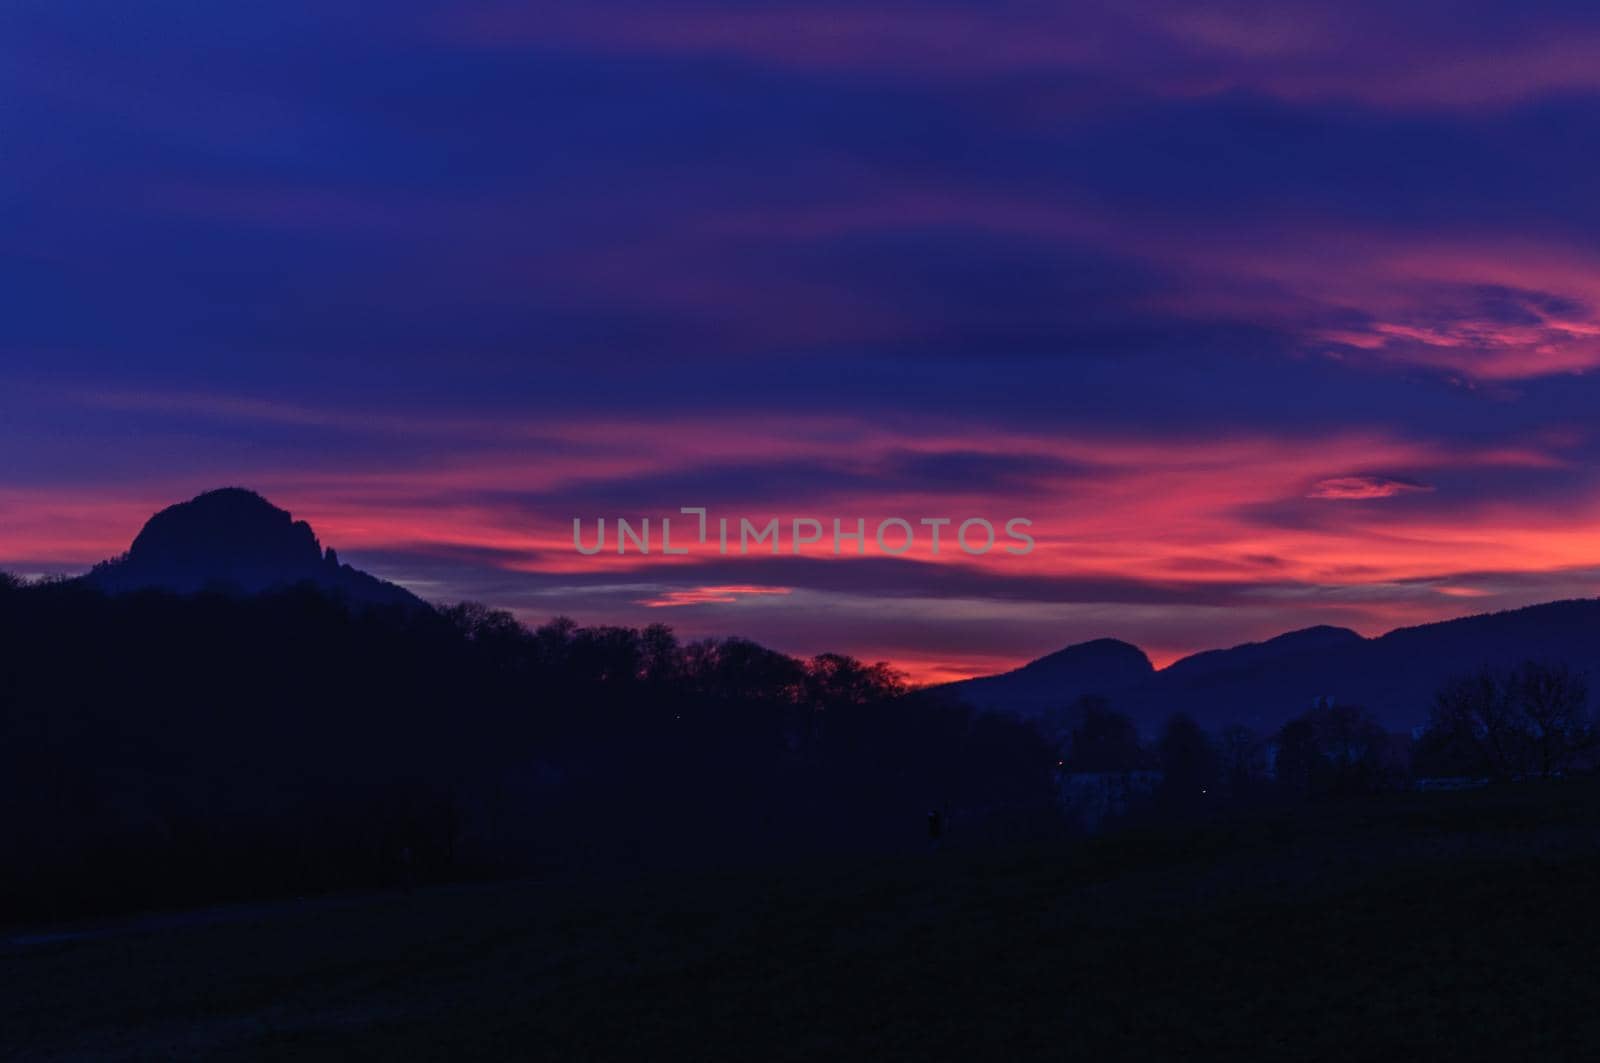 Sunset over Mountains. Night dark blue and pink sky and silhouette of mountain by shanserika